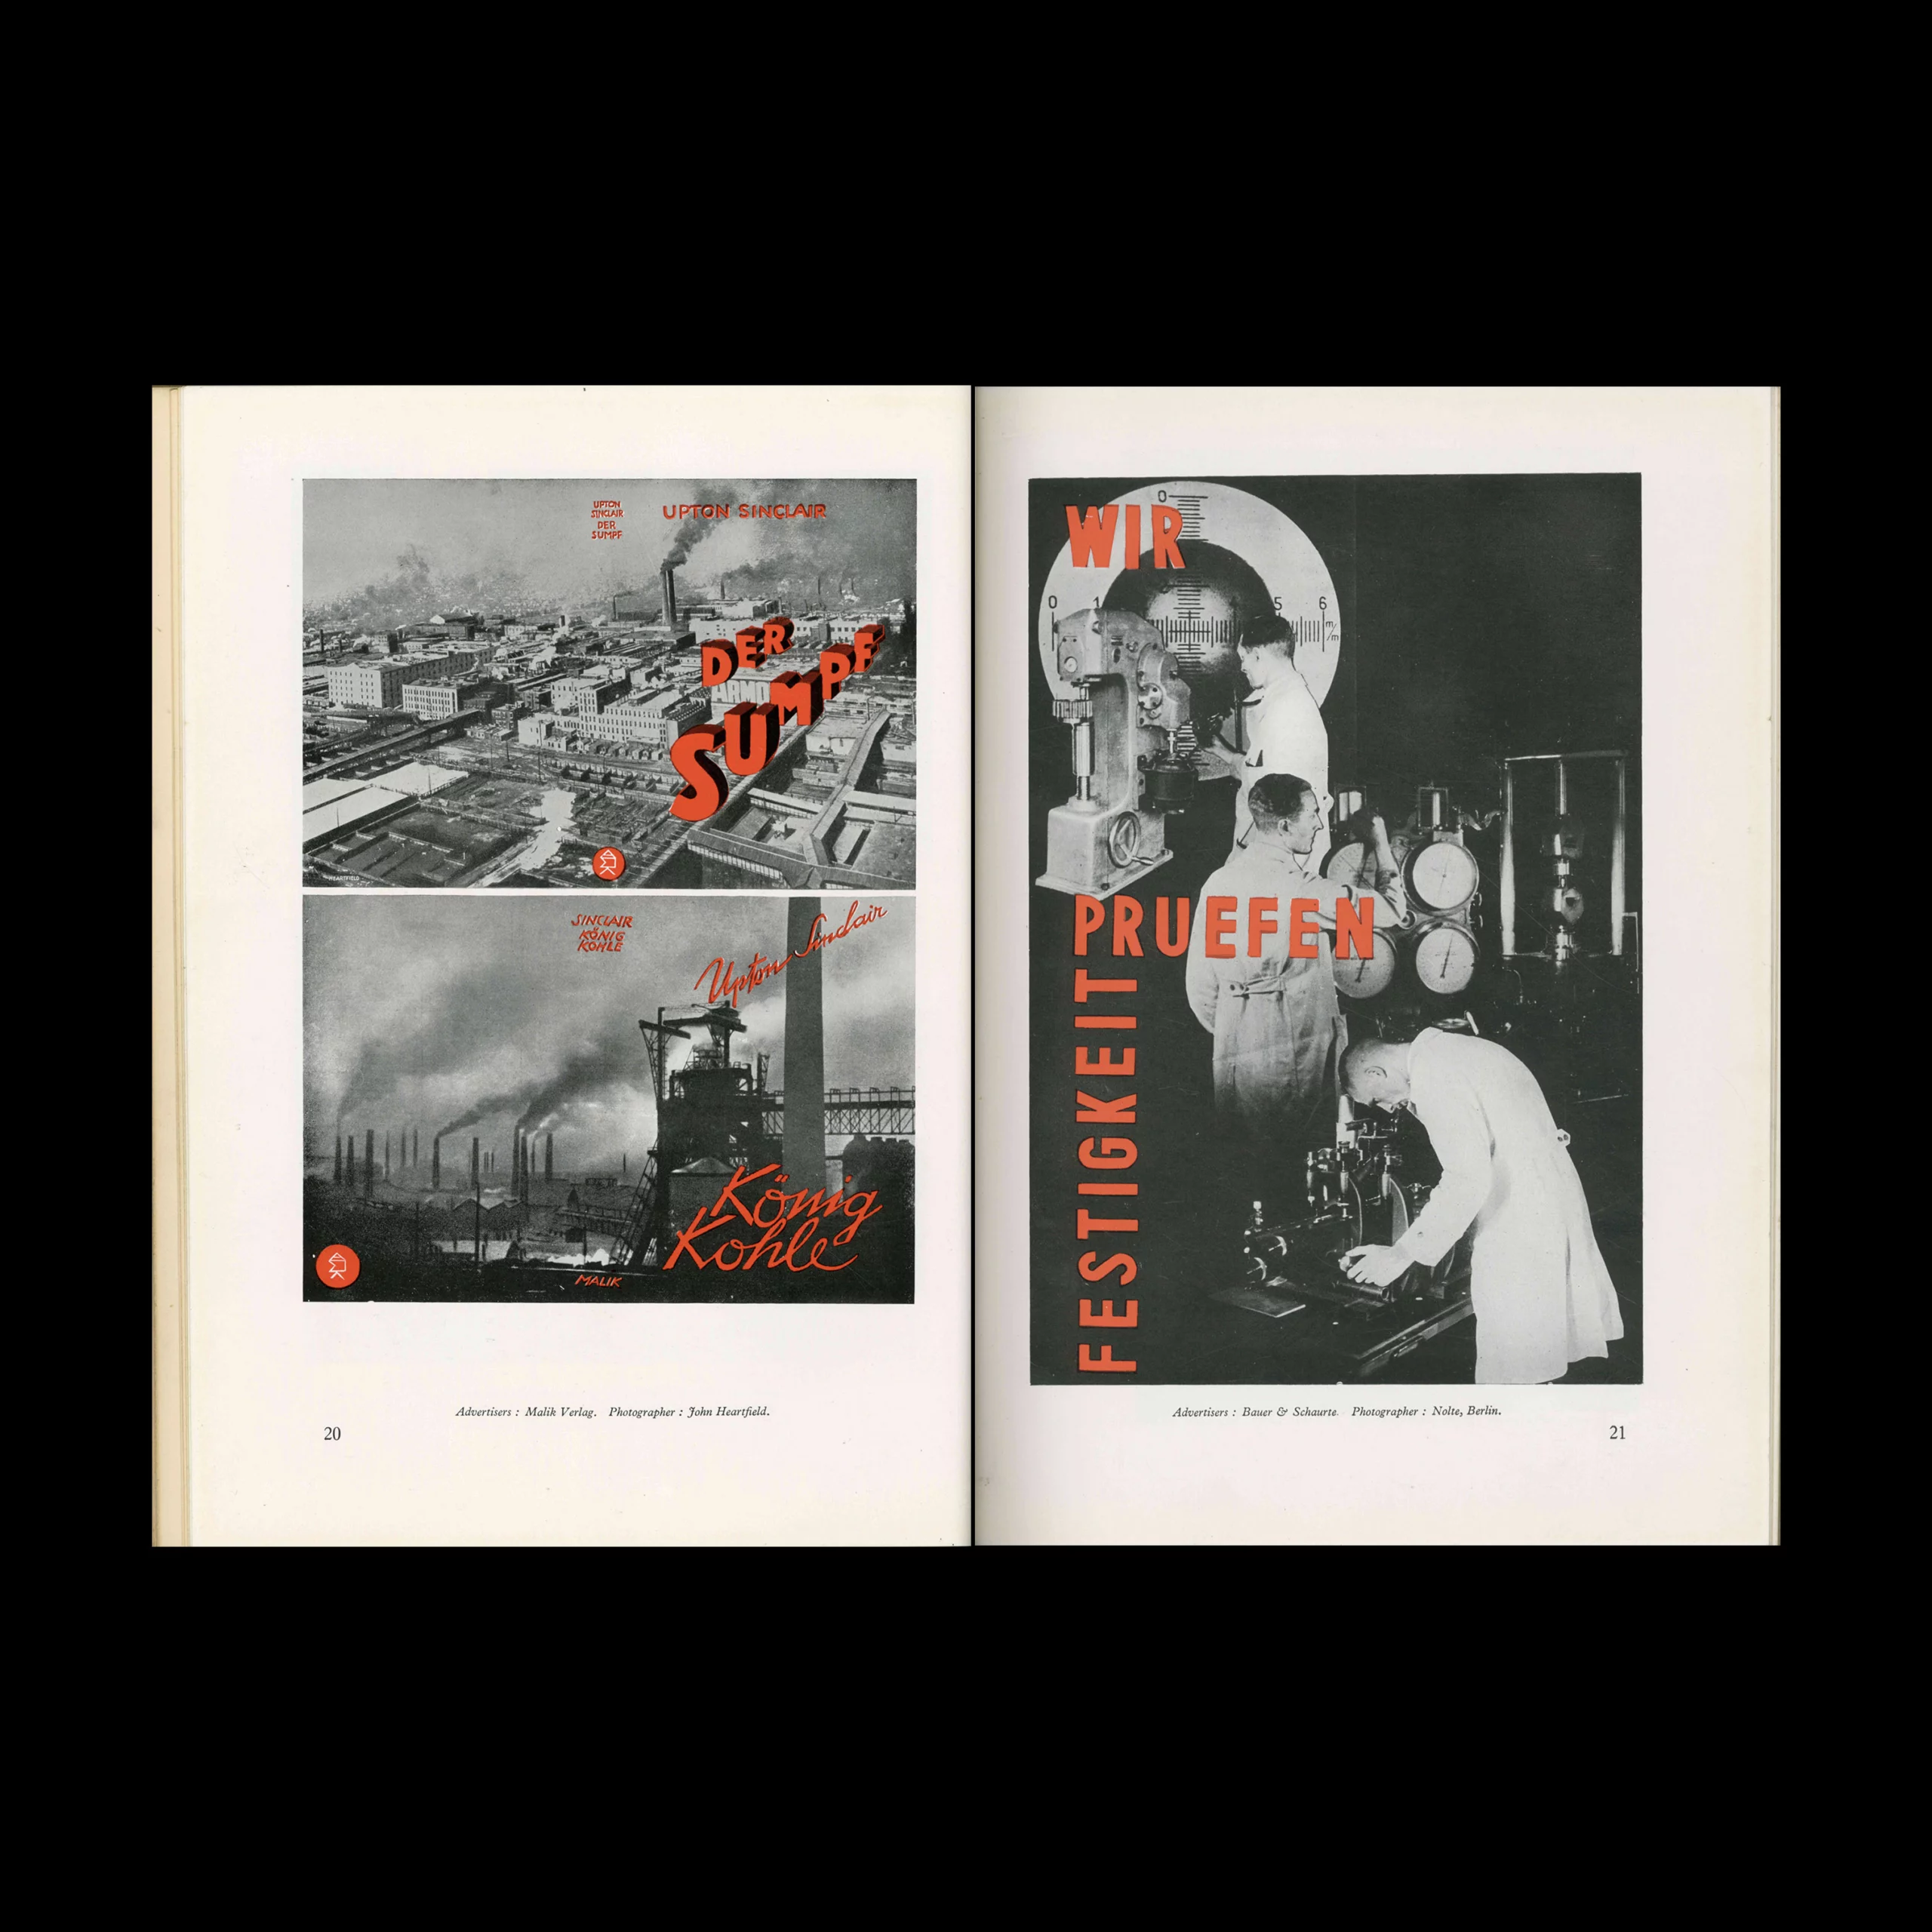 Posters and Publicity 1929, Commercial Art Annual, The Studio, 1929